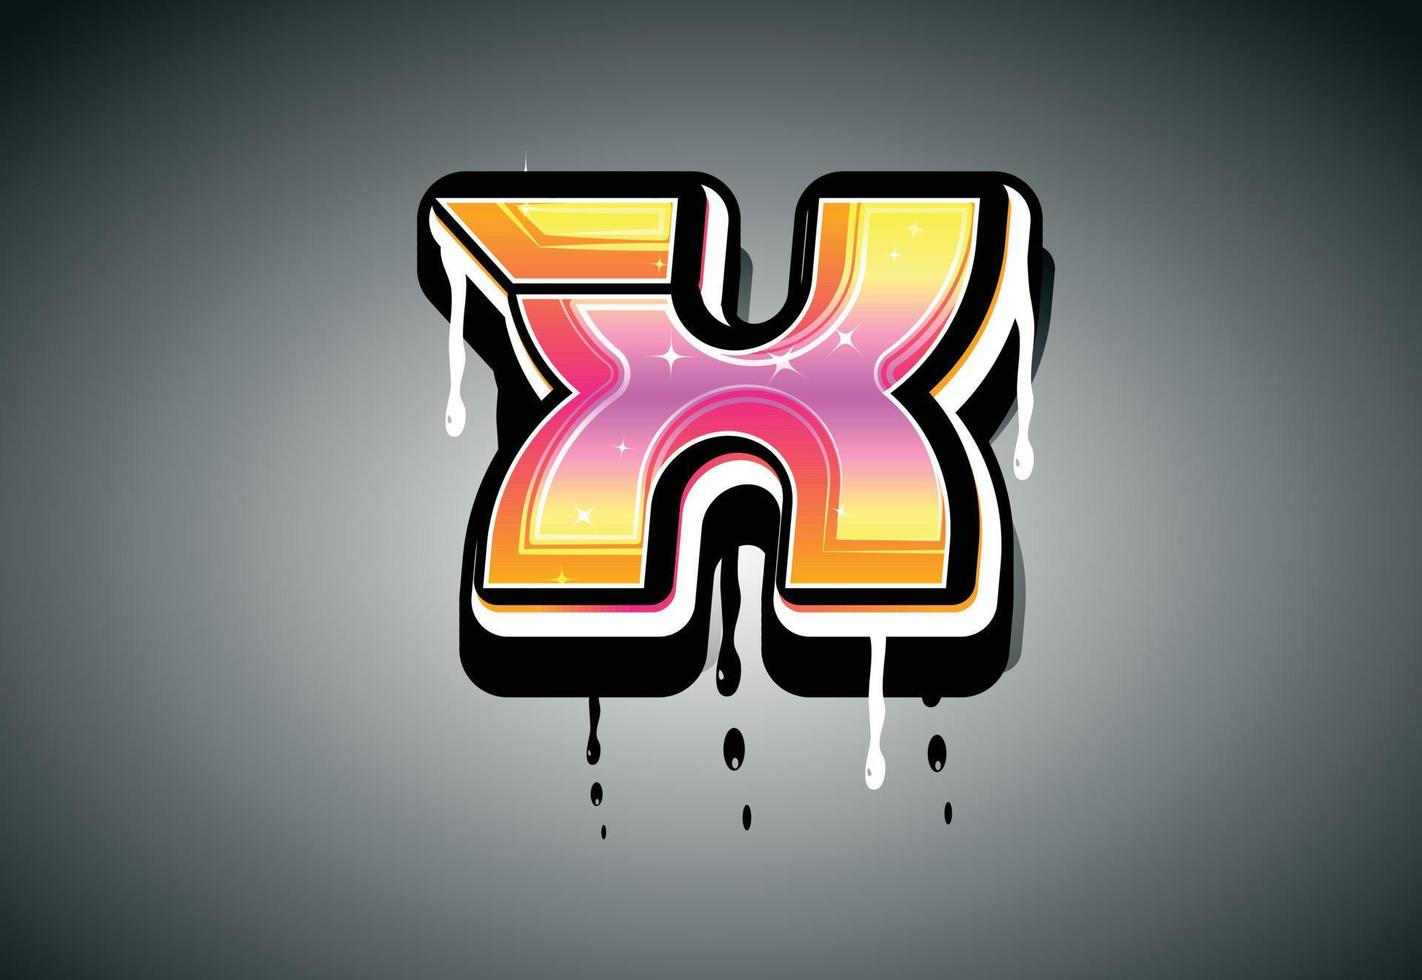 3D X Letter graffiti with drip effect vector